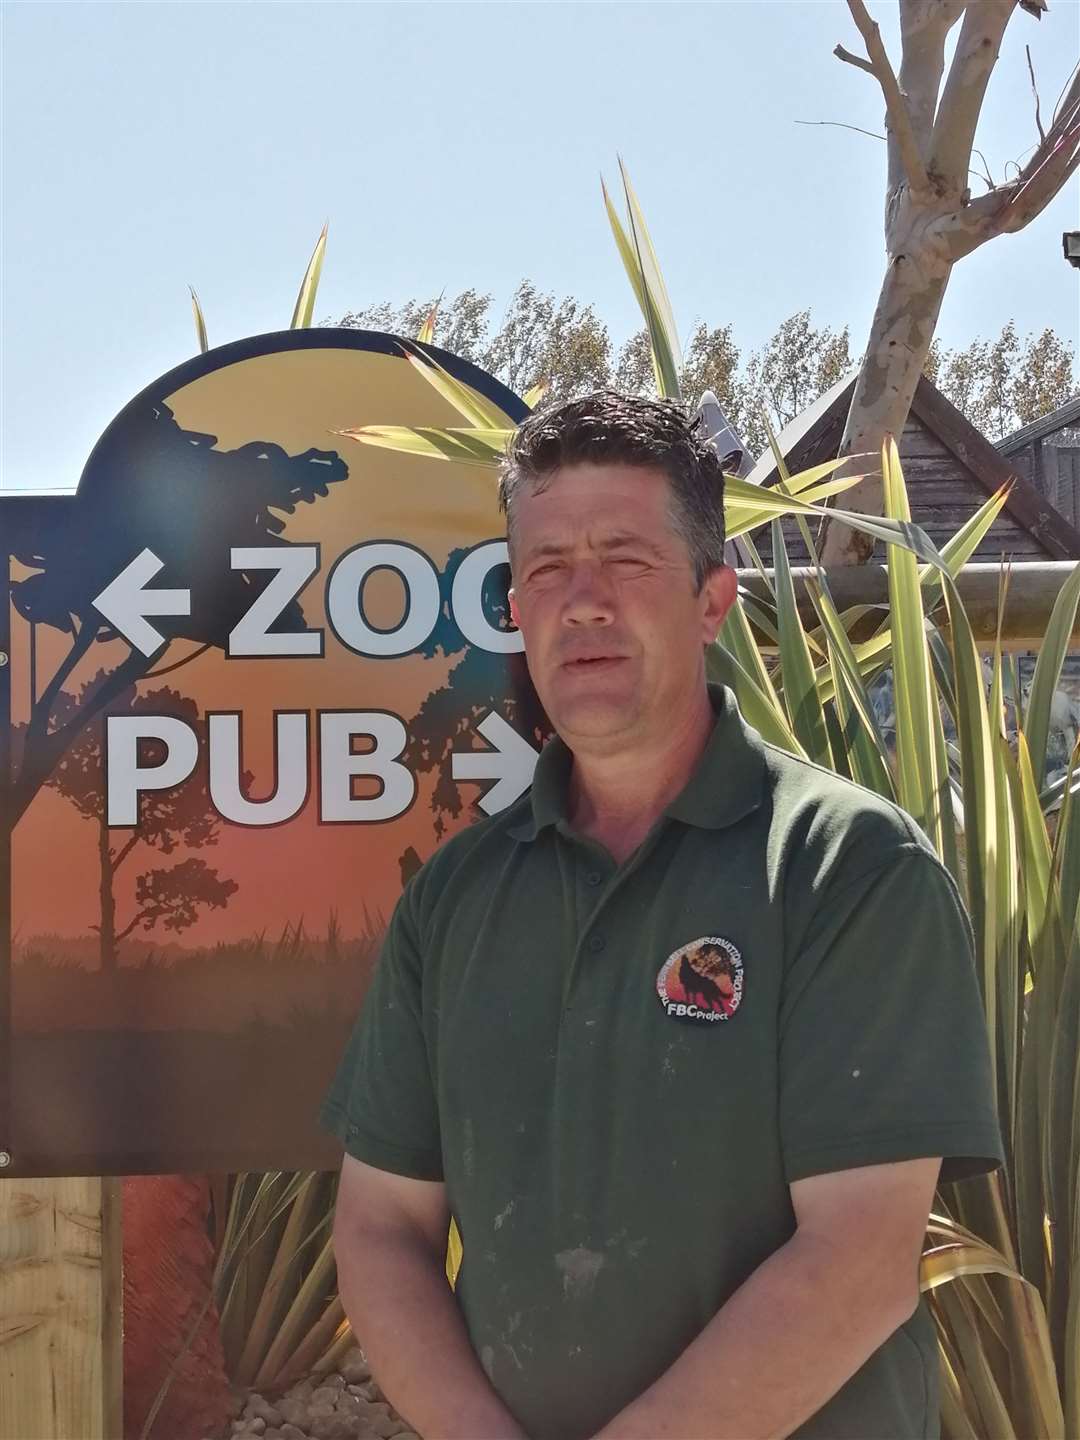 Andy Cowell, owner of The Fenn Bell Zoo and pub in St Mary Hoo, Rochester, thanked the public for the generosity